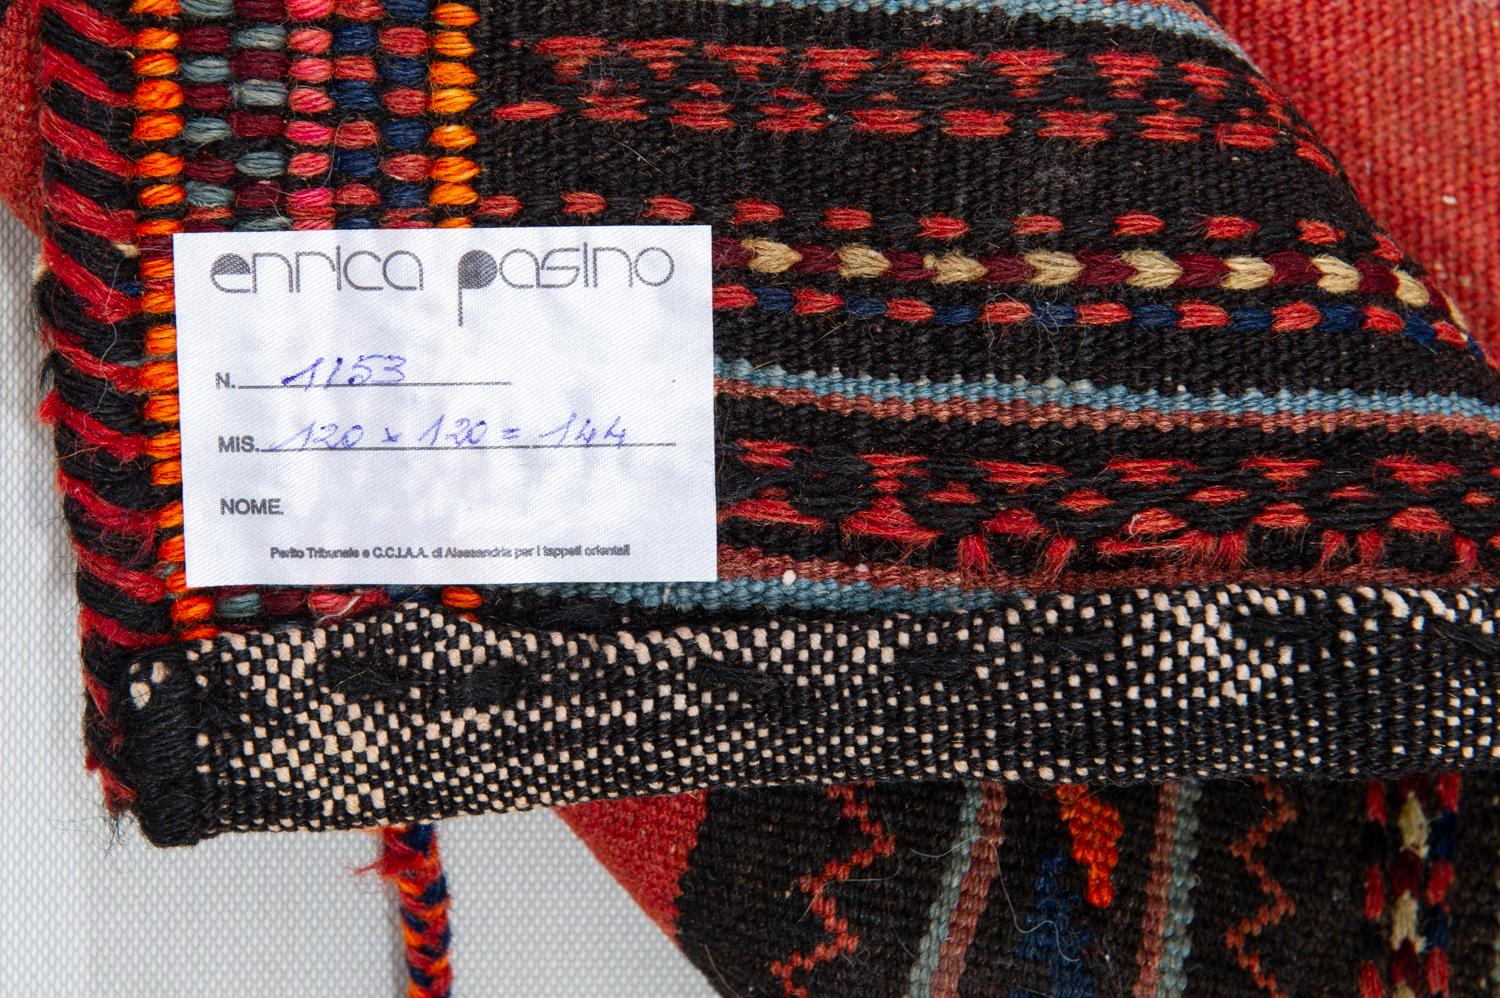 nr. 1153 - Interesting and rare little square kilim, used among nomads as table cloth laid on the ground.
The wools have been dyed with vegetable colors: central light blue streaks with indigo.
From my private collection.